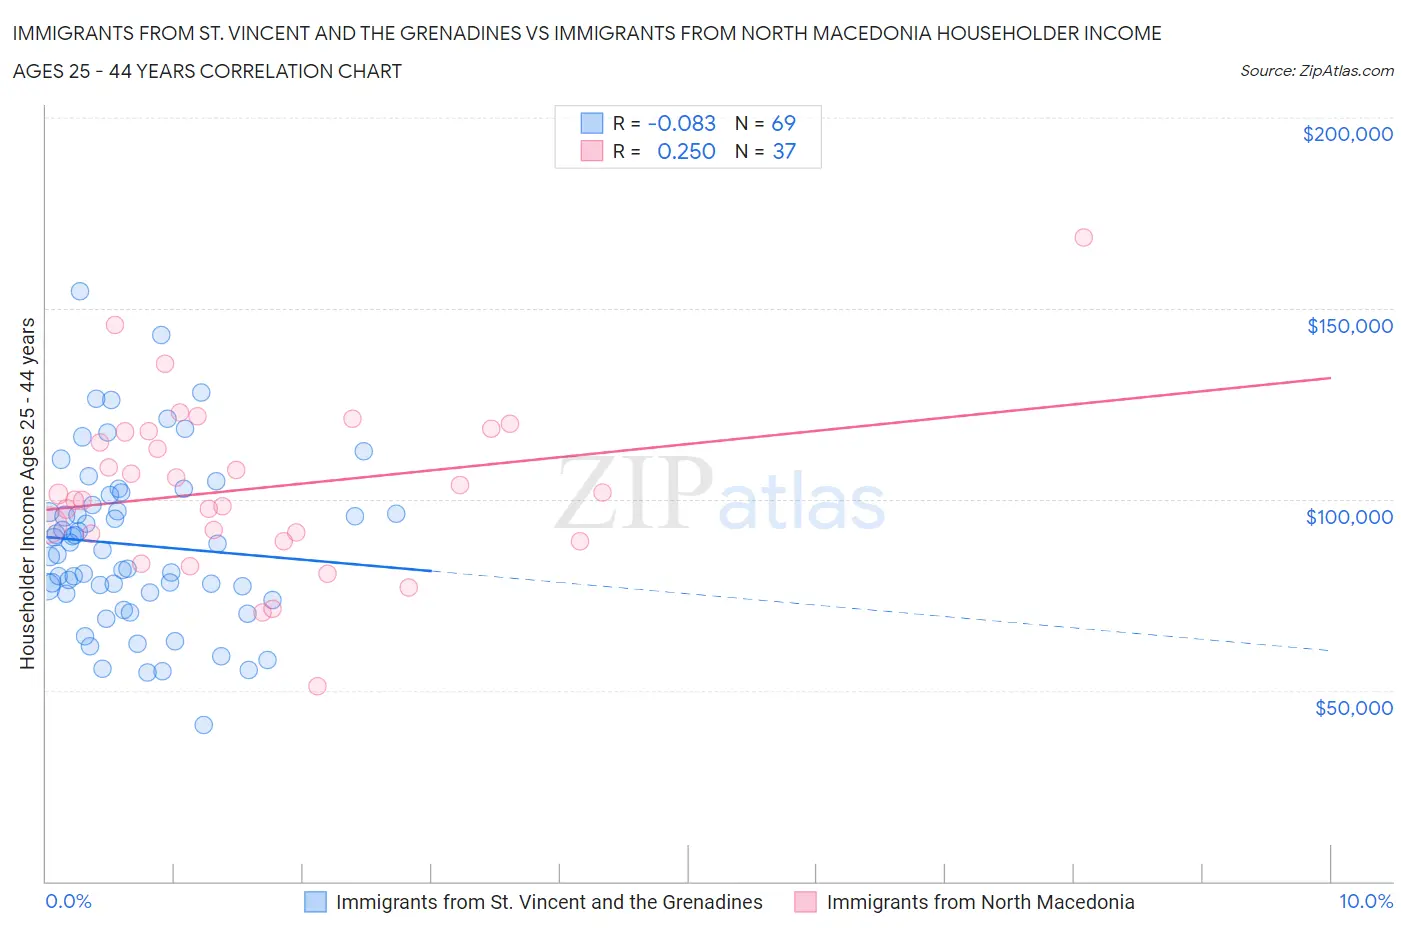 Immigrants from St. Vincent and the Grenadines vs Immigrants from North Macedonia Householder Income Ages 25 - 44 years